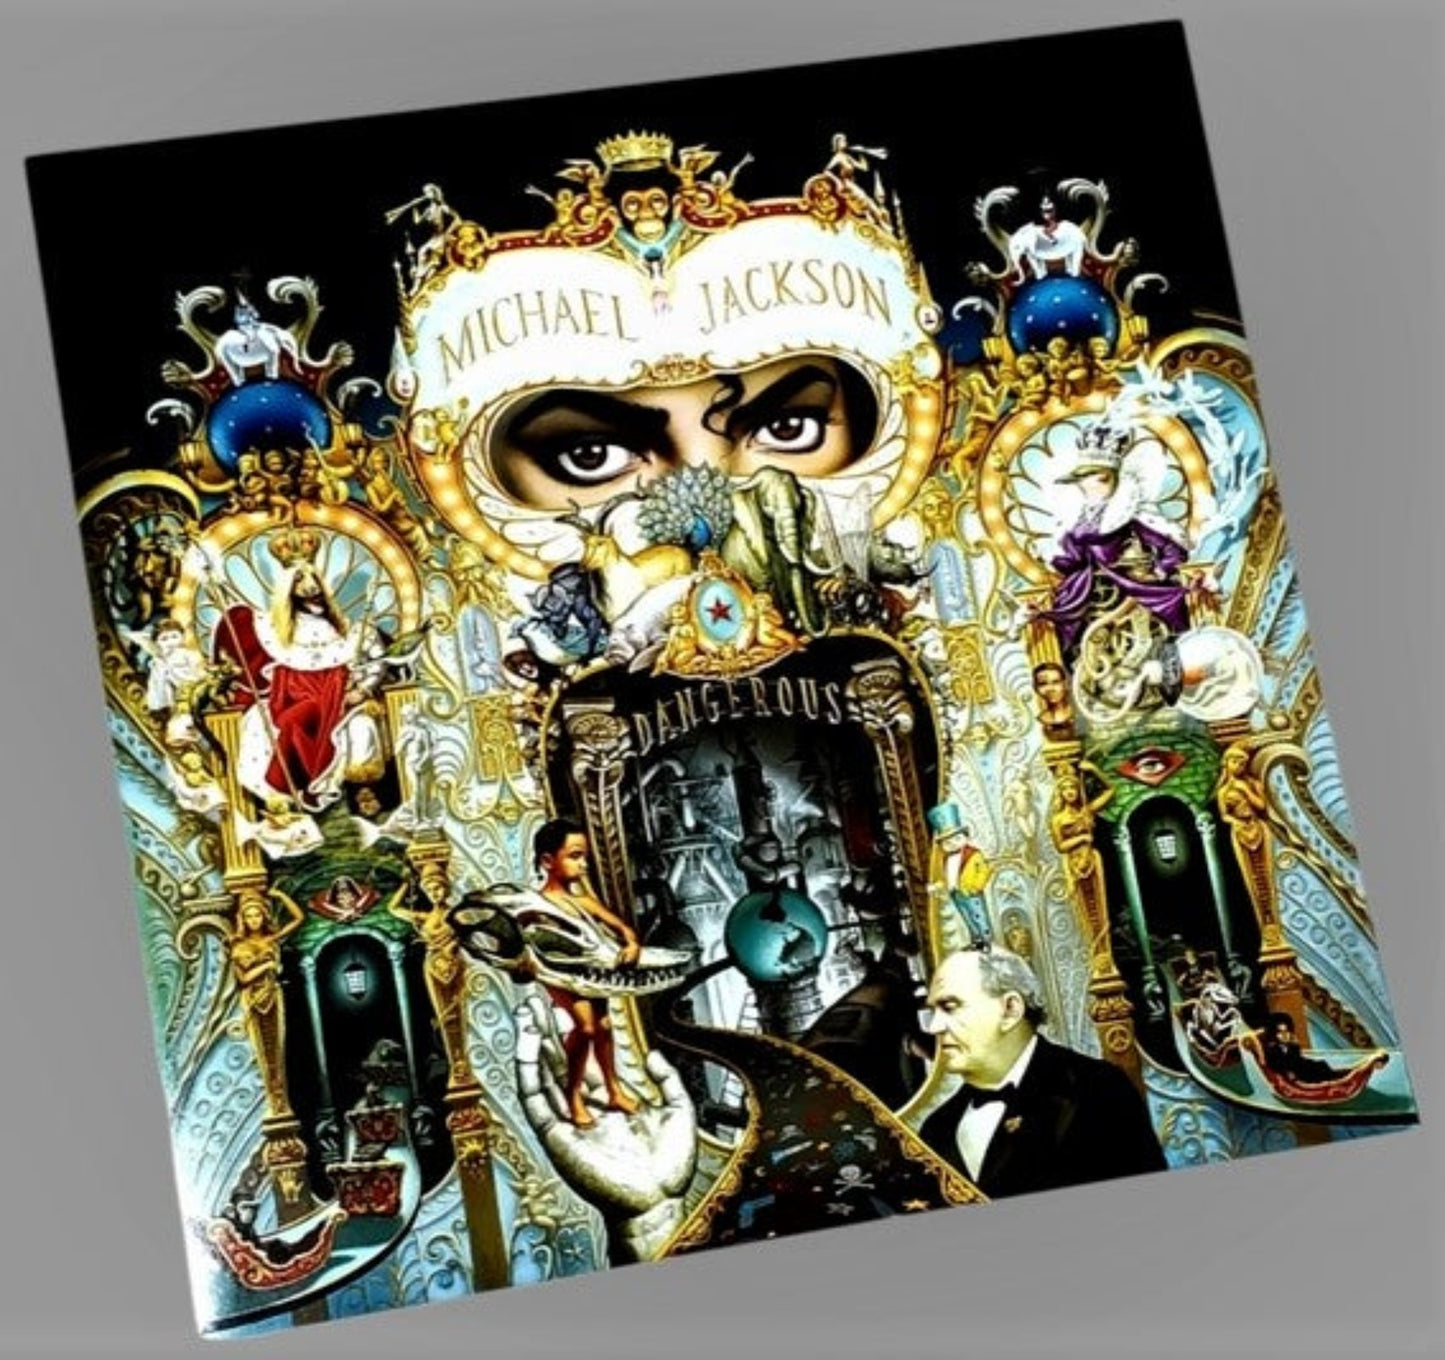 Michael Jackson Dangerous Album Wall Poster For Sale In AREA51GALLERY New Orleans